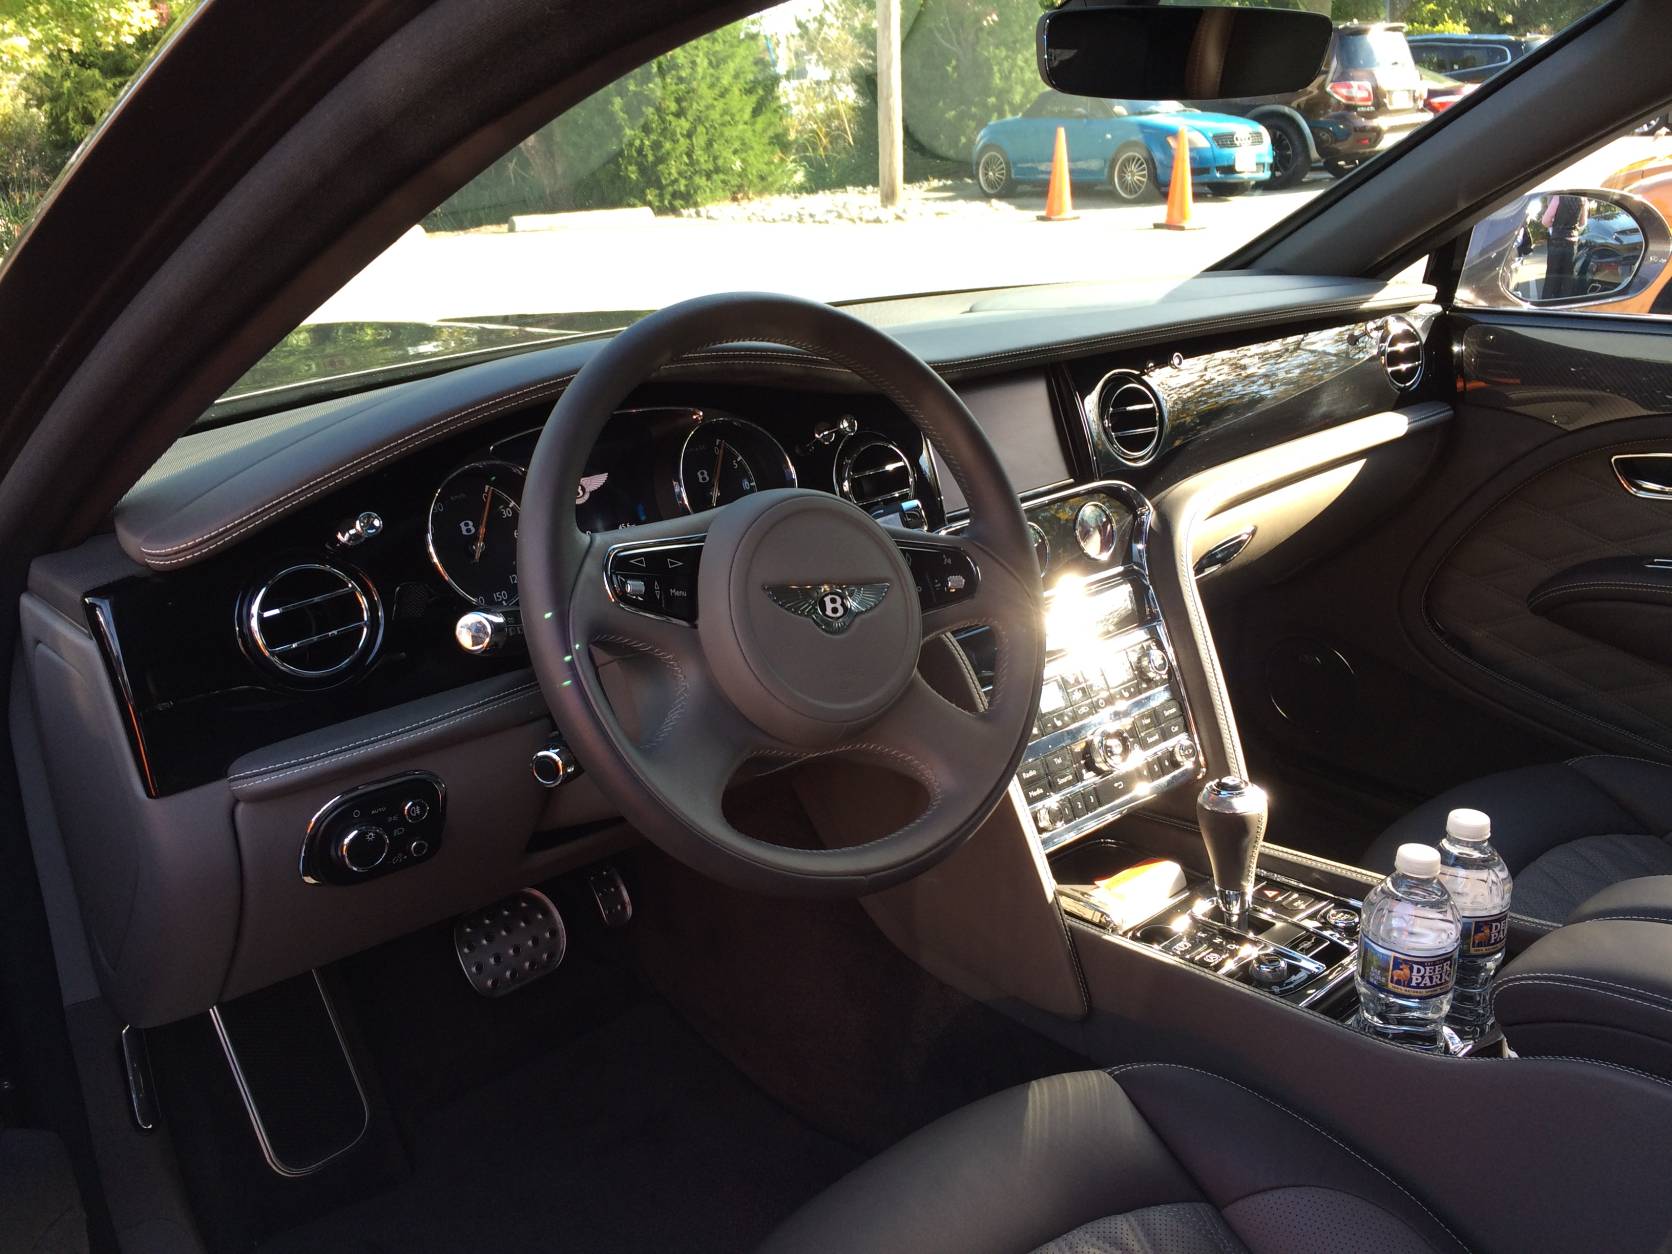 The leather interior of the Bentley Mulsanne is topnotch with the finest looking wood inlays, aluminum and carbon fiber trim WTOP's Mike Parris have ever seen. Space is good in the front and back seat. (WTOP/Mike Parris)